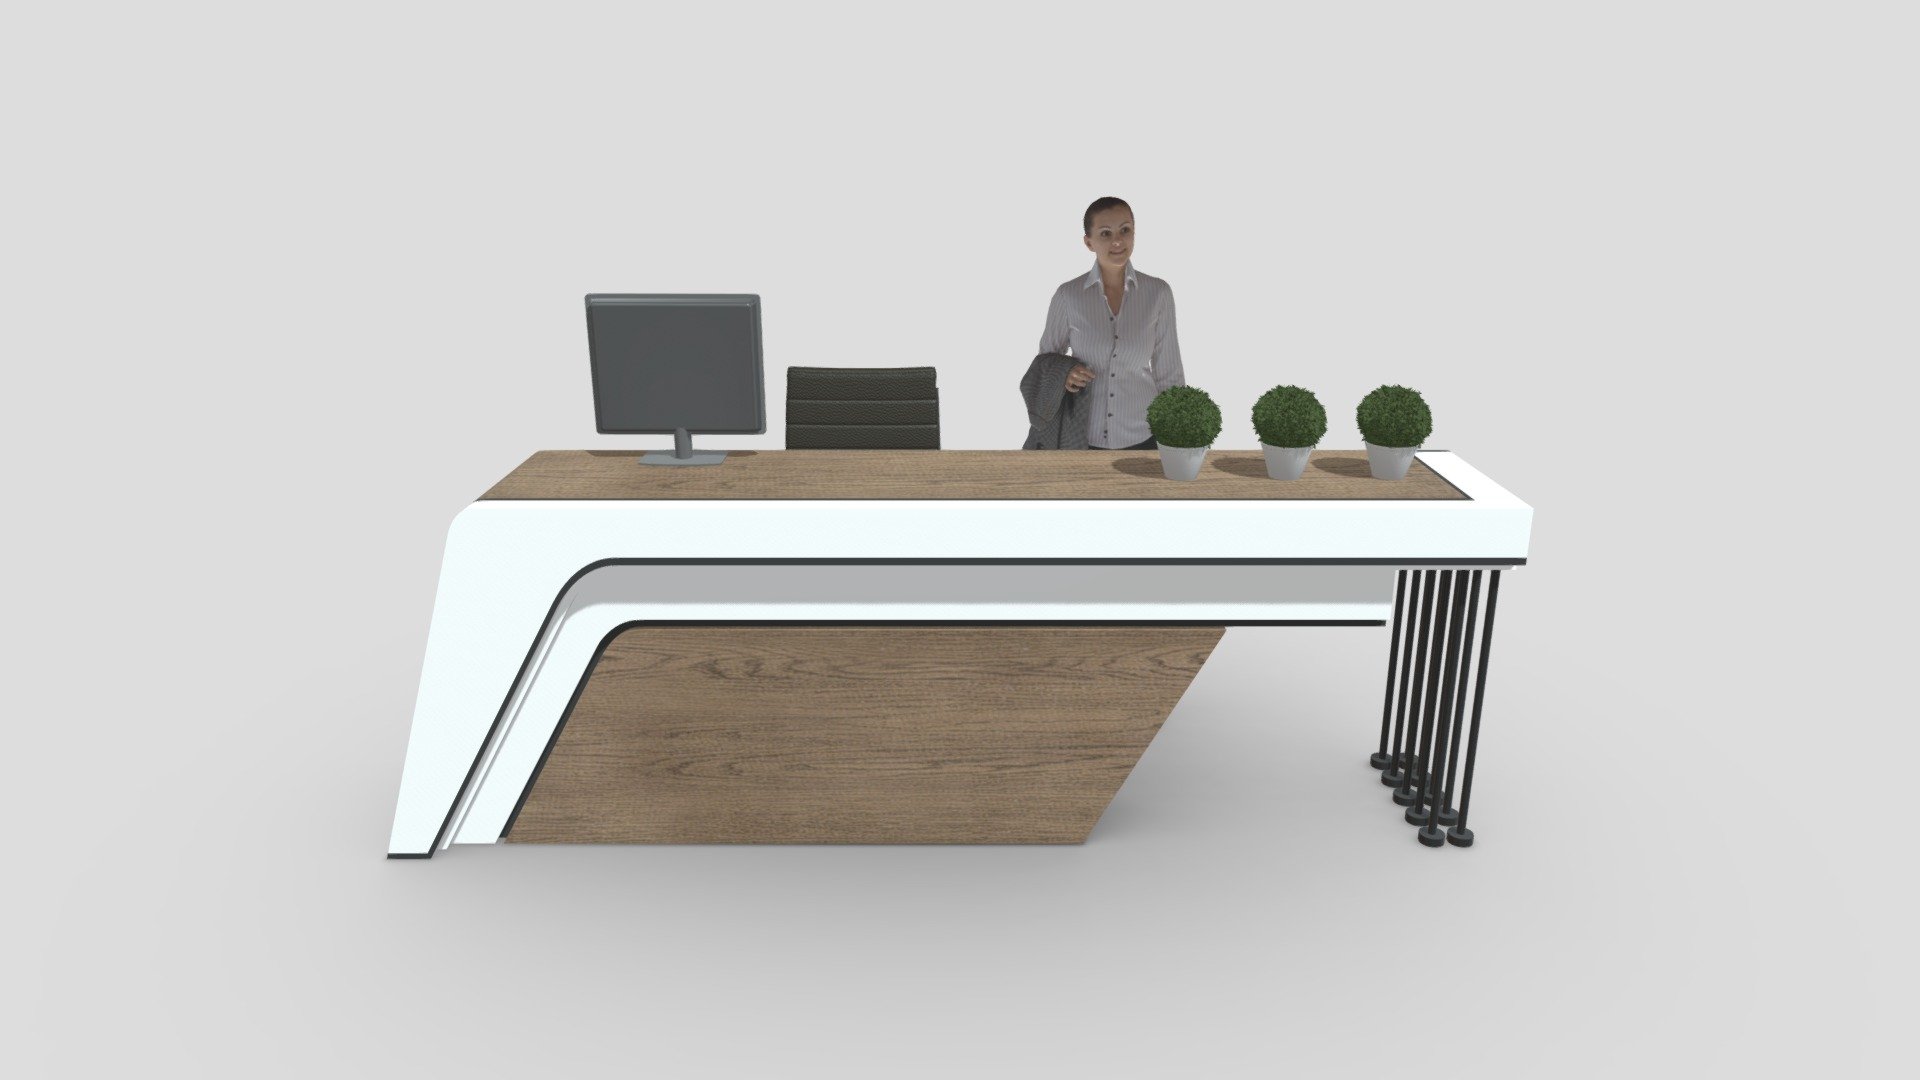 Reception Desk - 088

Native Format File : 3Ds Max 2020 &ndash; Rendering by Vray Next

File save as : 3Ds Max 2017 with converted all object to Editable Poly.

Exporting Formats :
Autodesk FBX ( .fbx ) and OBJ ( .obj &amp; .mtl ).

All 7 Texture maps are include as JPG.

Support 24/7 3d model